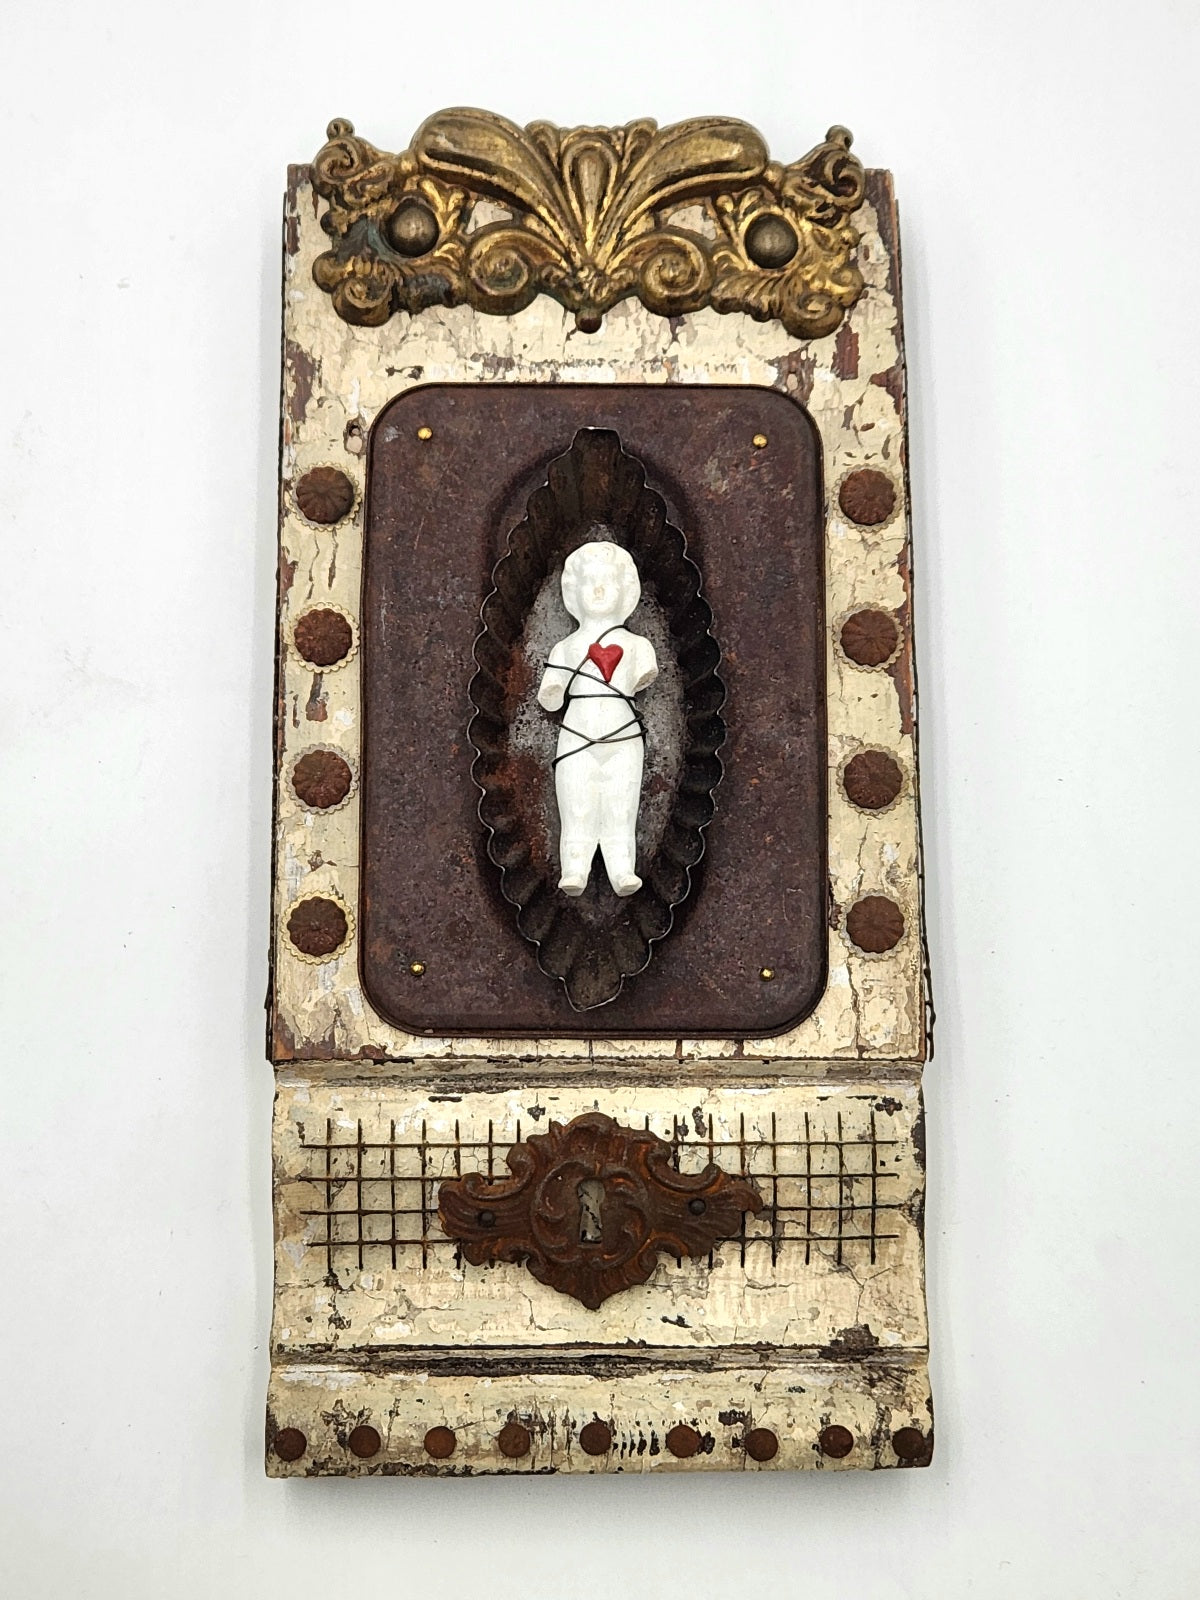 Assemblage Art - Angel Heart and Keyhole